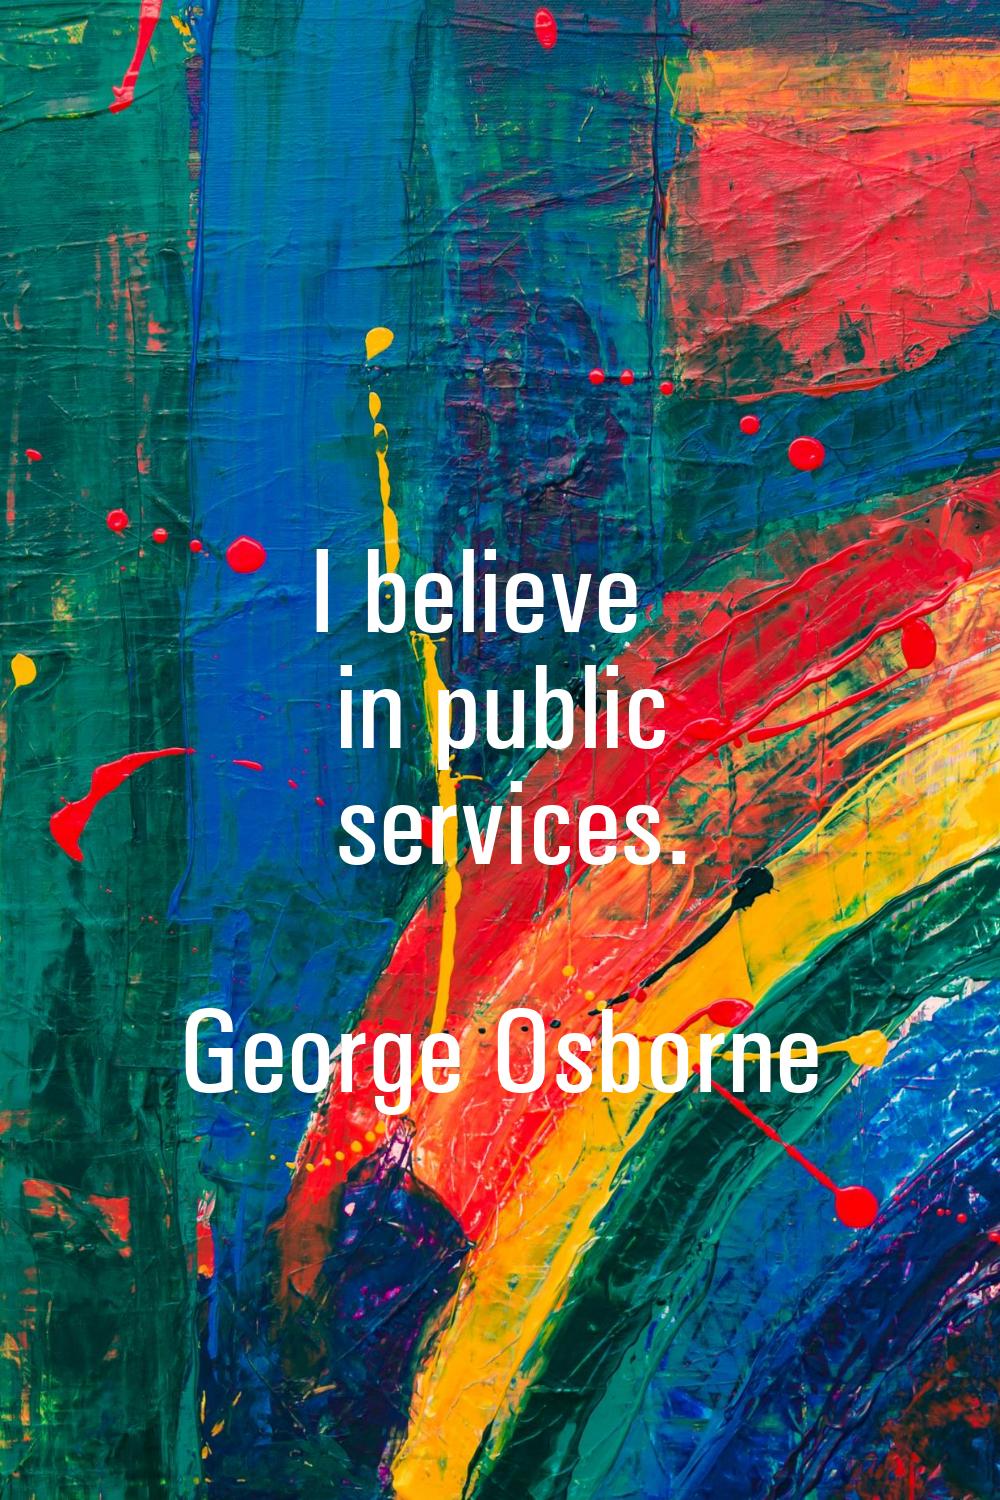 I believe in public services.